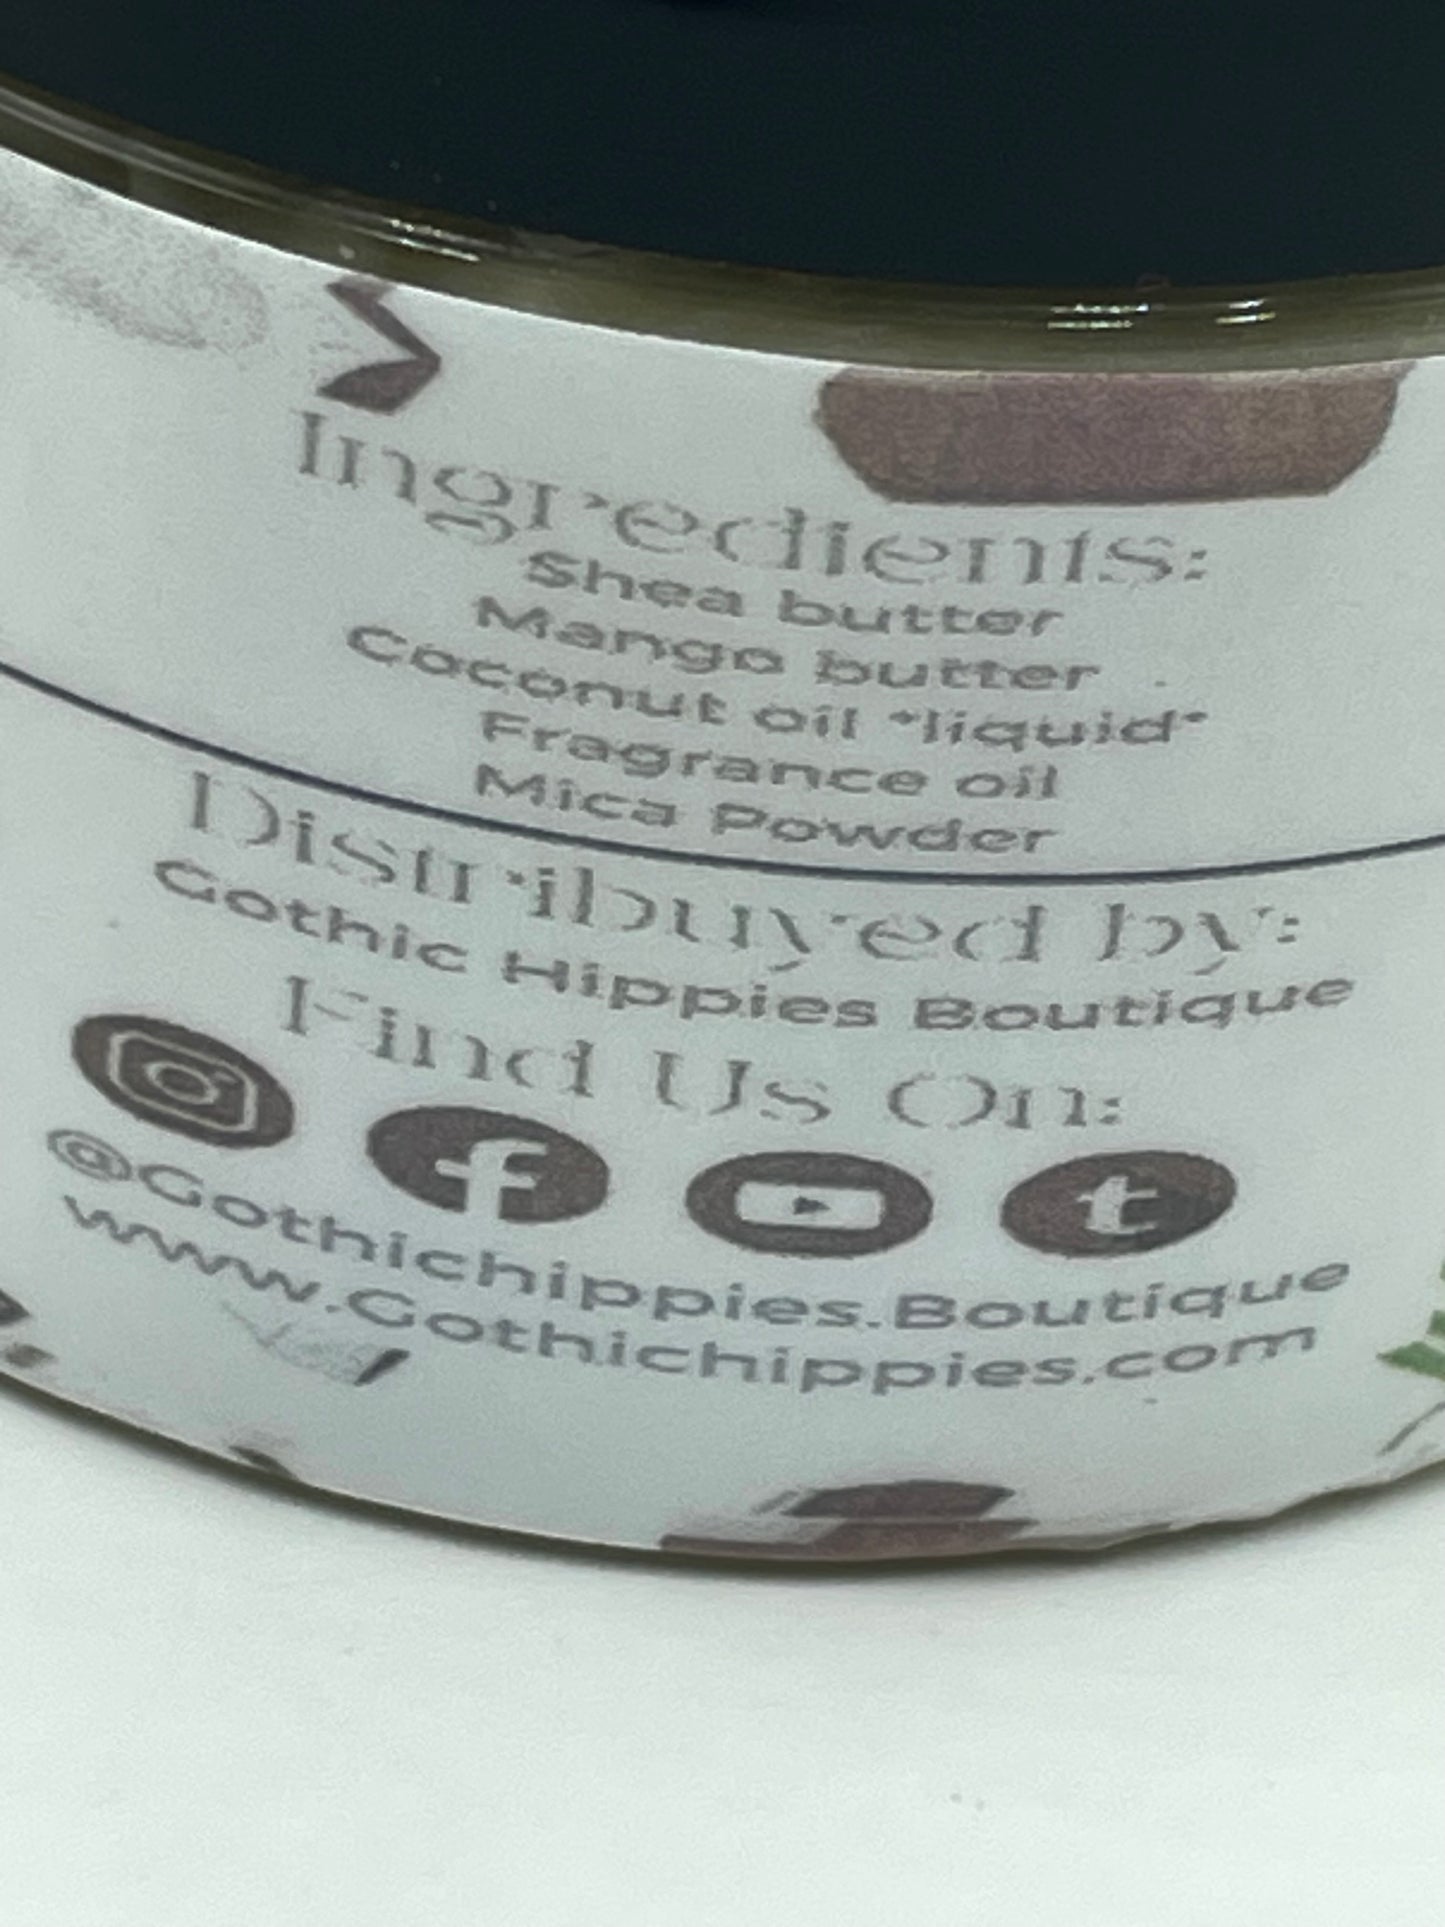 Gothic Hippies Body Butter